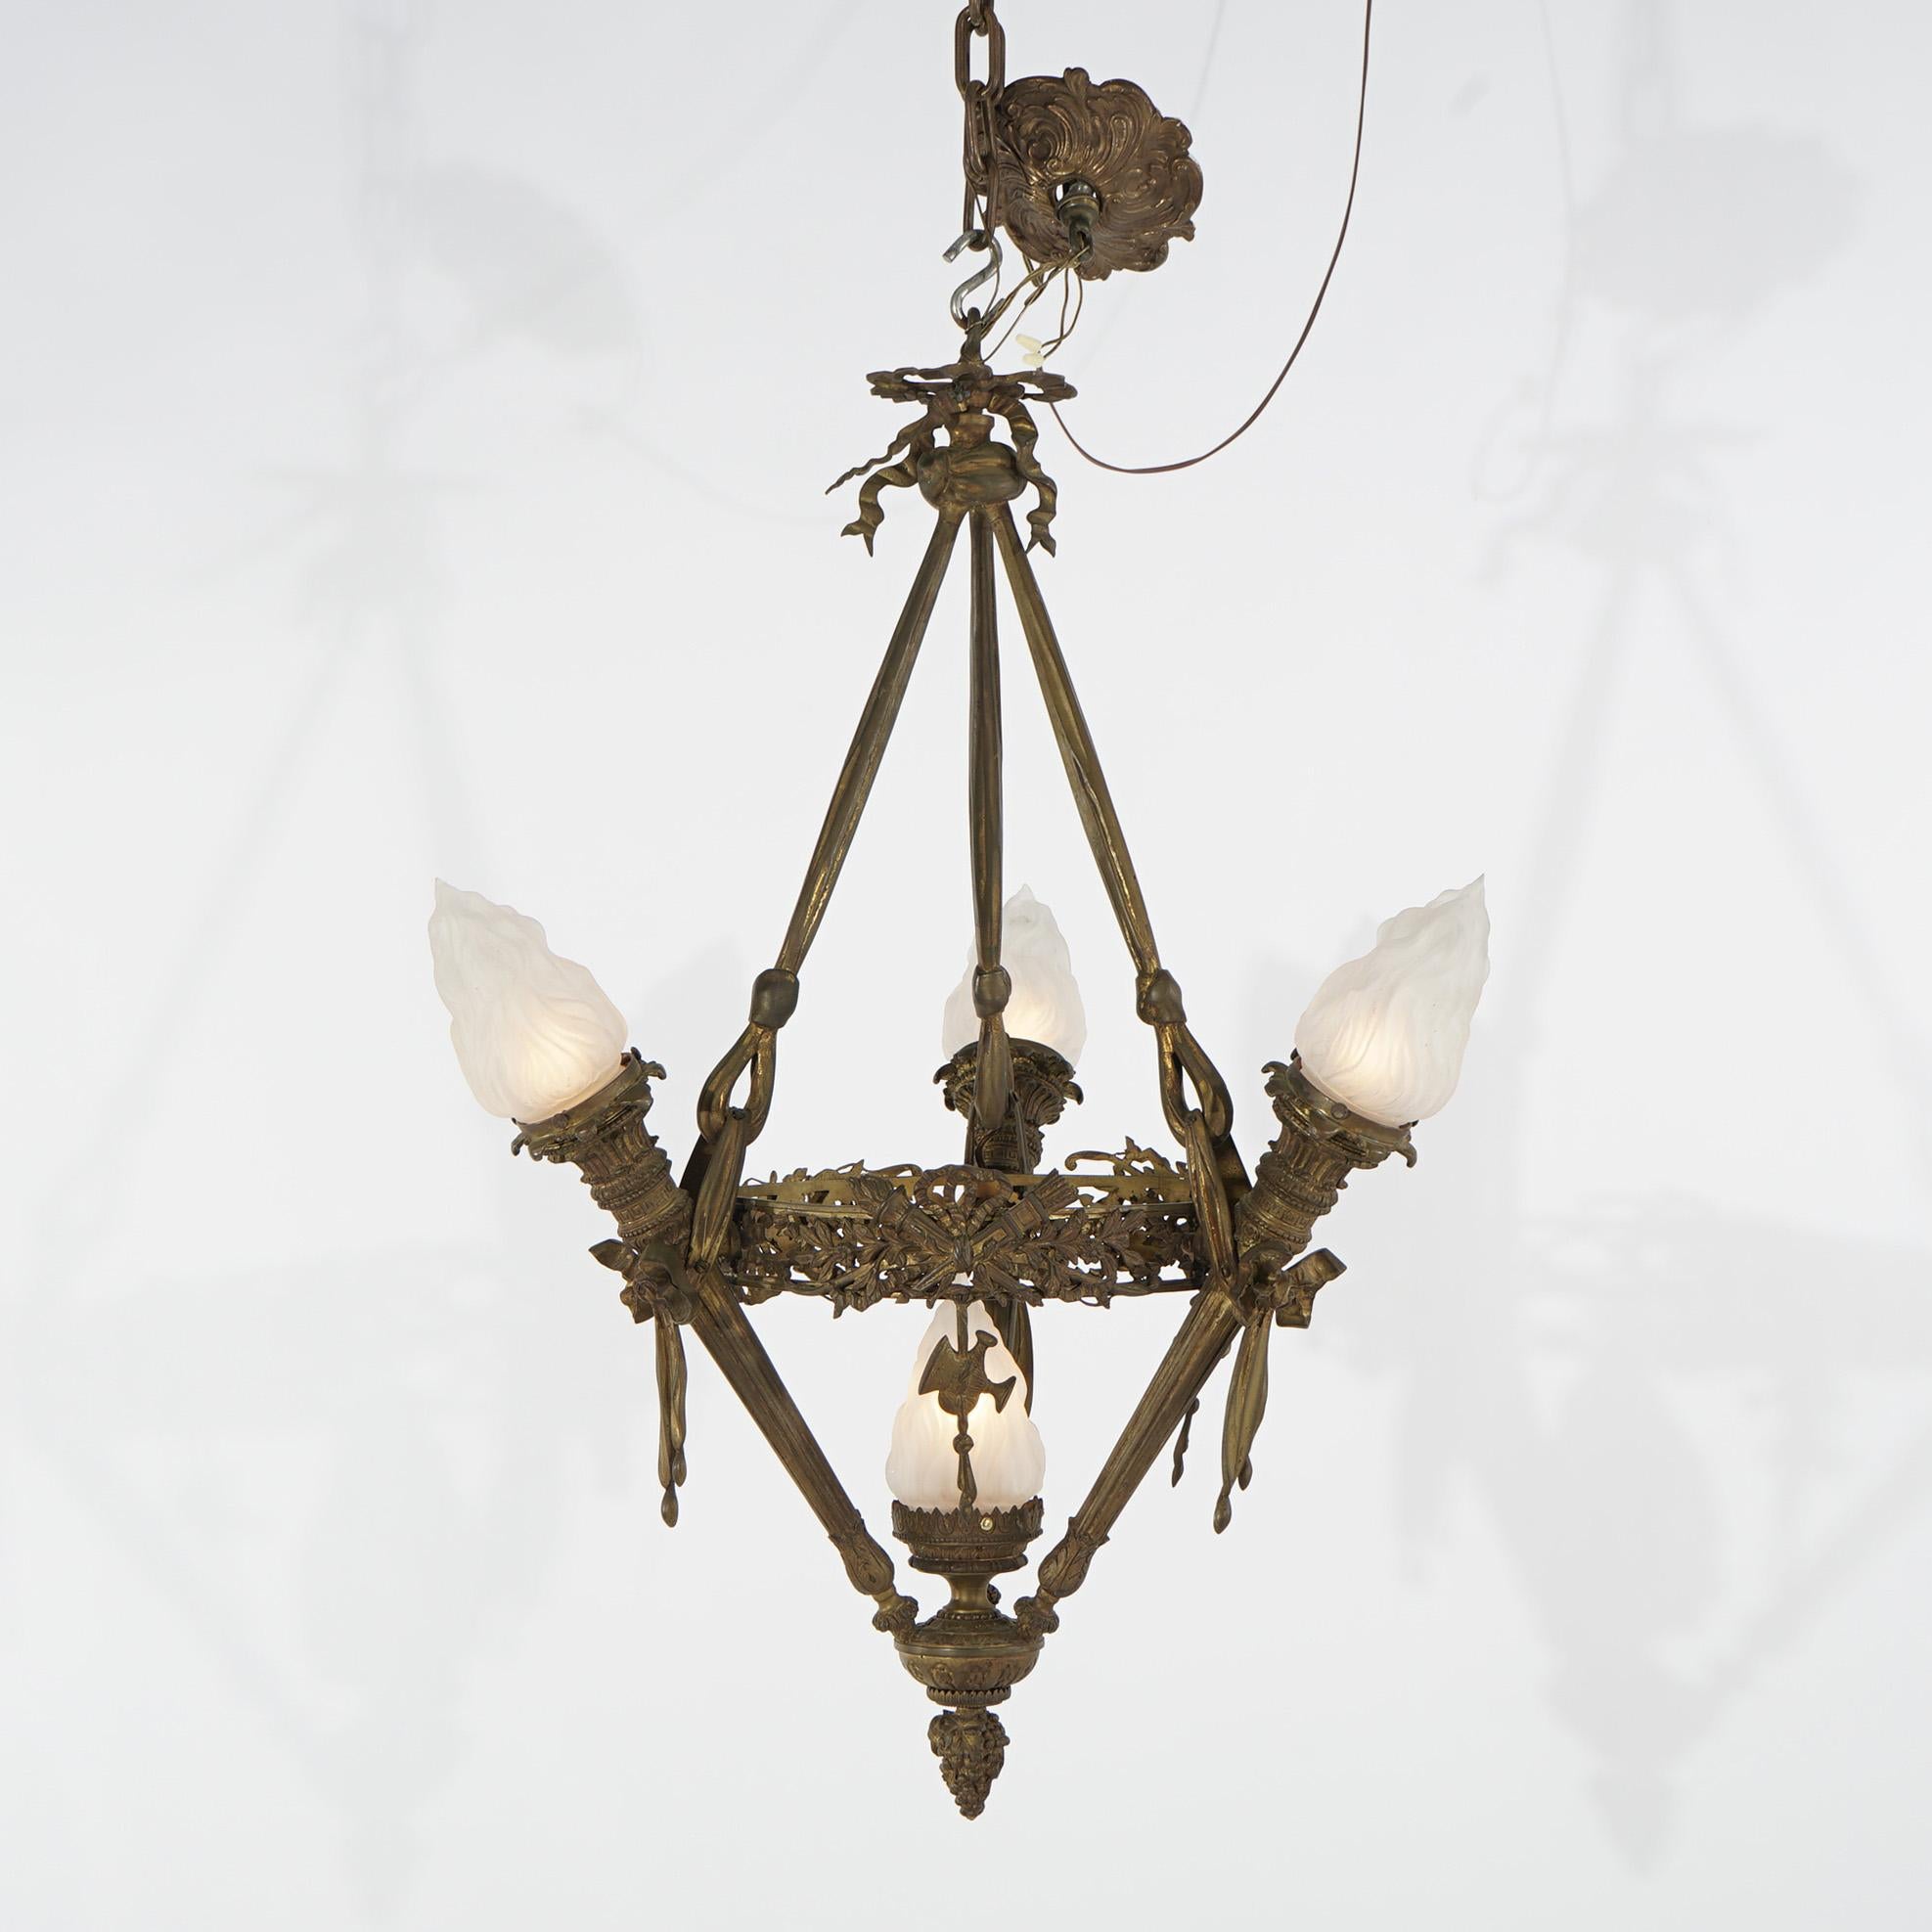 ***Ask About Discounted In-House Shipping***
Antique Gilt Bronze French Empire Figural Four Light Torch Hanging Fixture with Flame Form Shades Circa 1920

Measures - 57